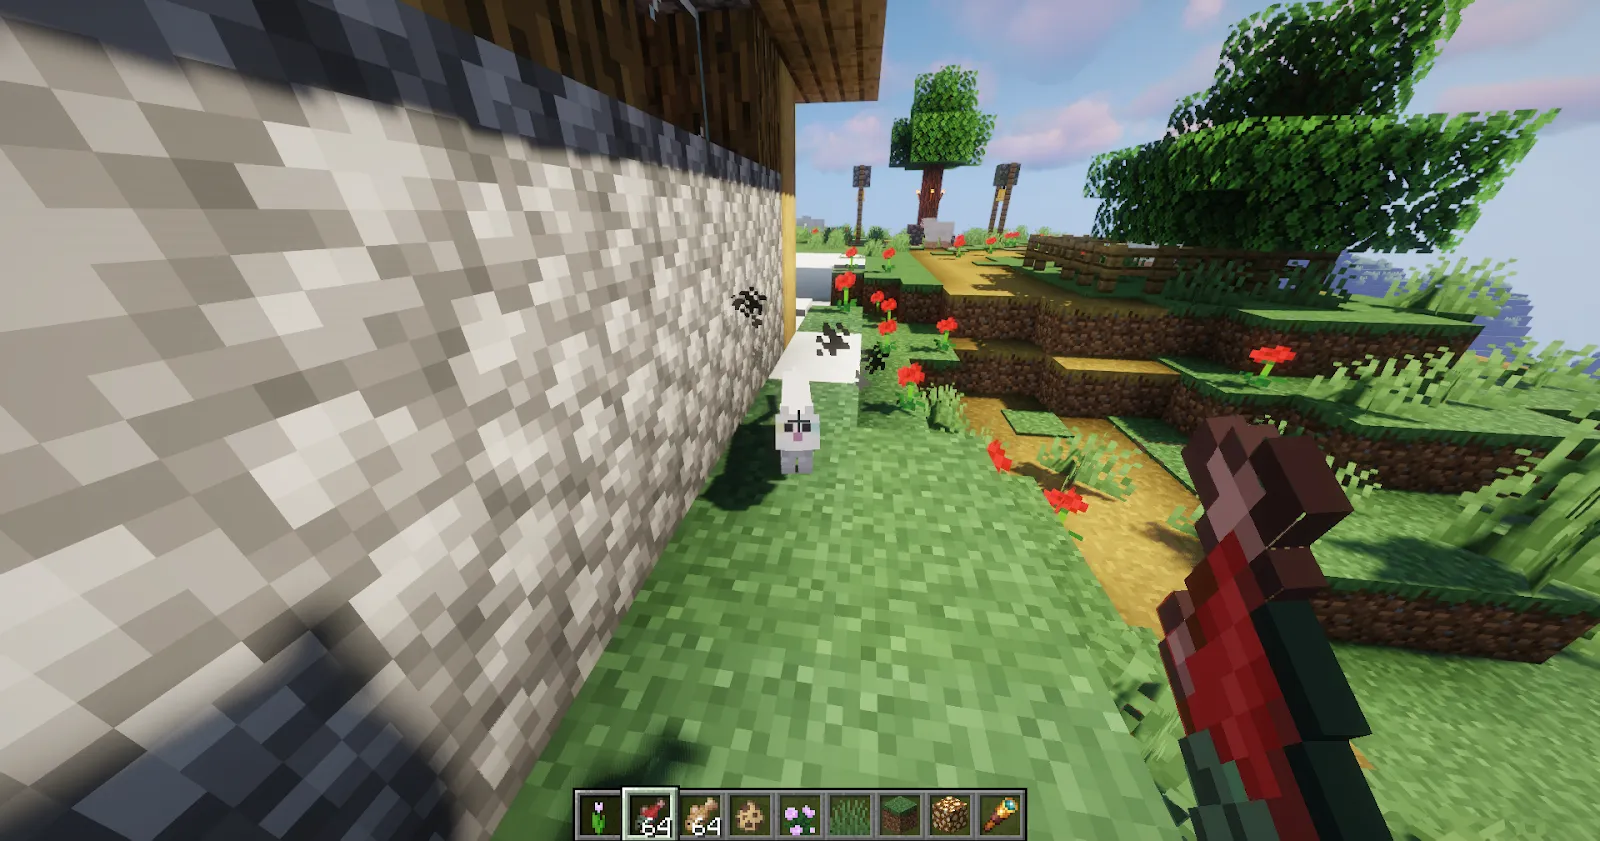 Approaching Minecraft cat to tame